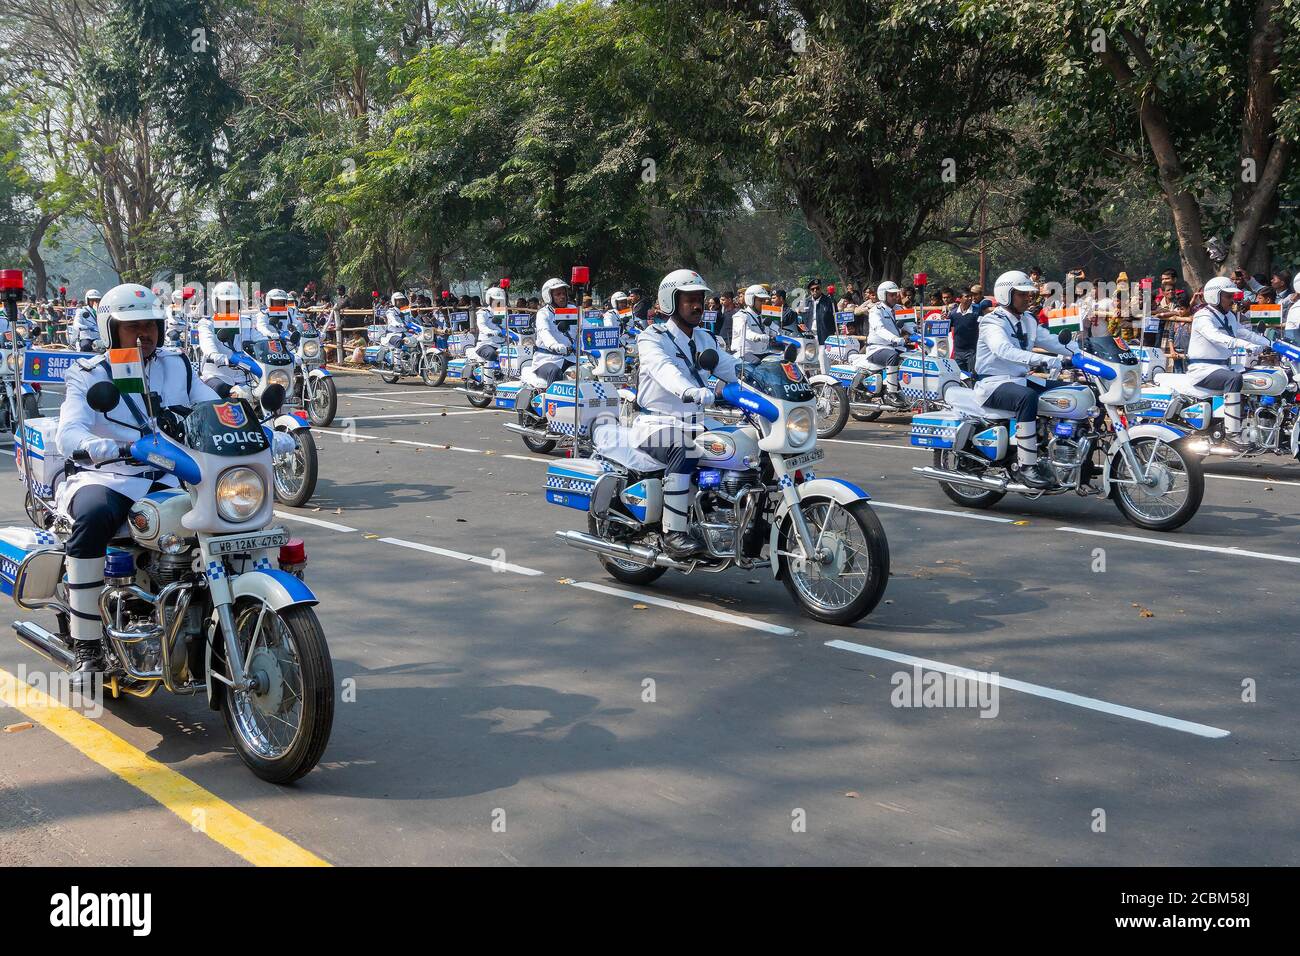 Kolkata, West Bengal, India - 26th January 2020 : West Bengal Police are marching past on their motorcycles, motorbike rally for India's Republic Day. Stock Photo